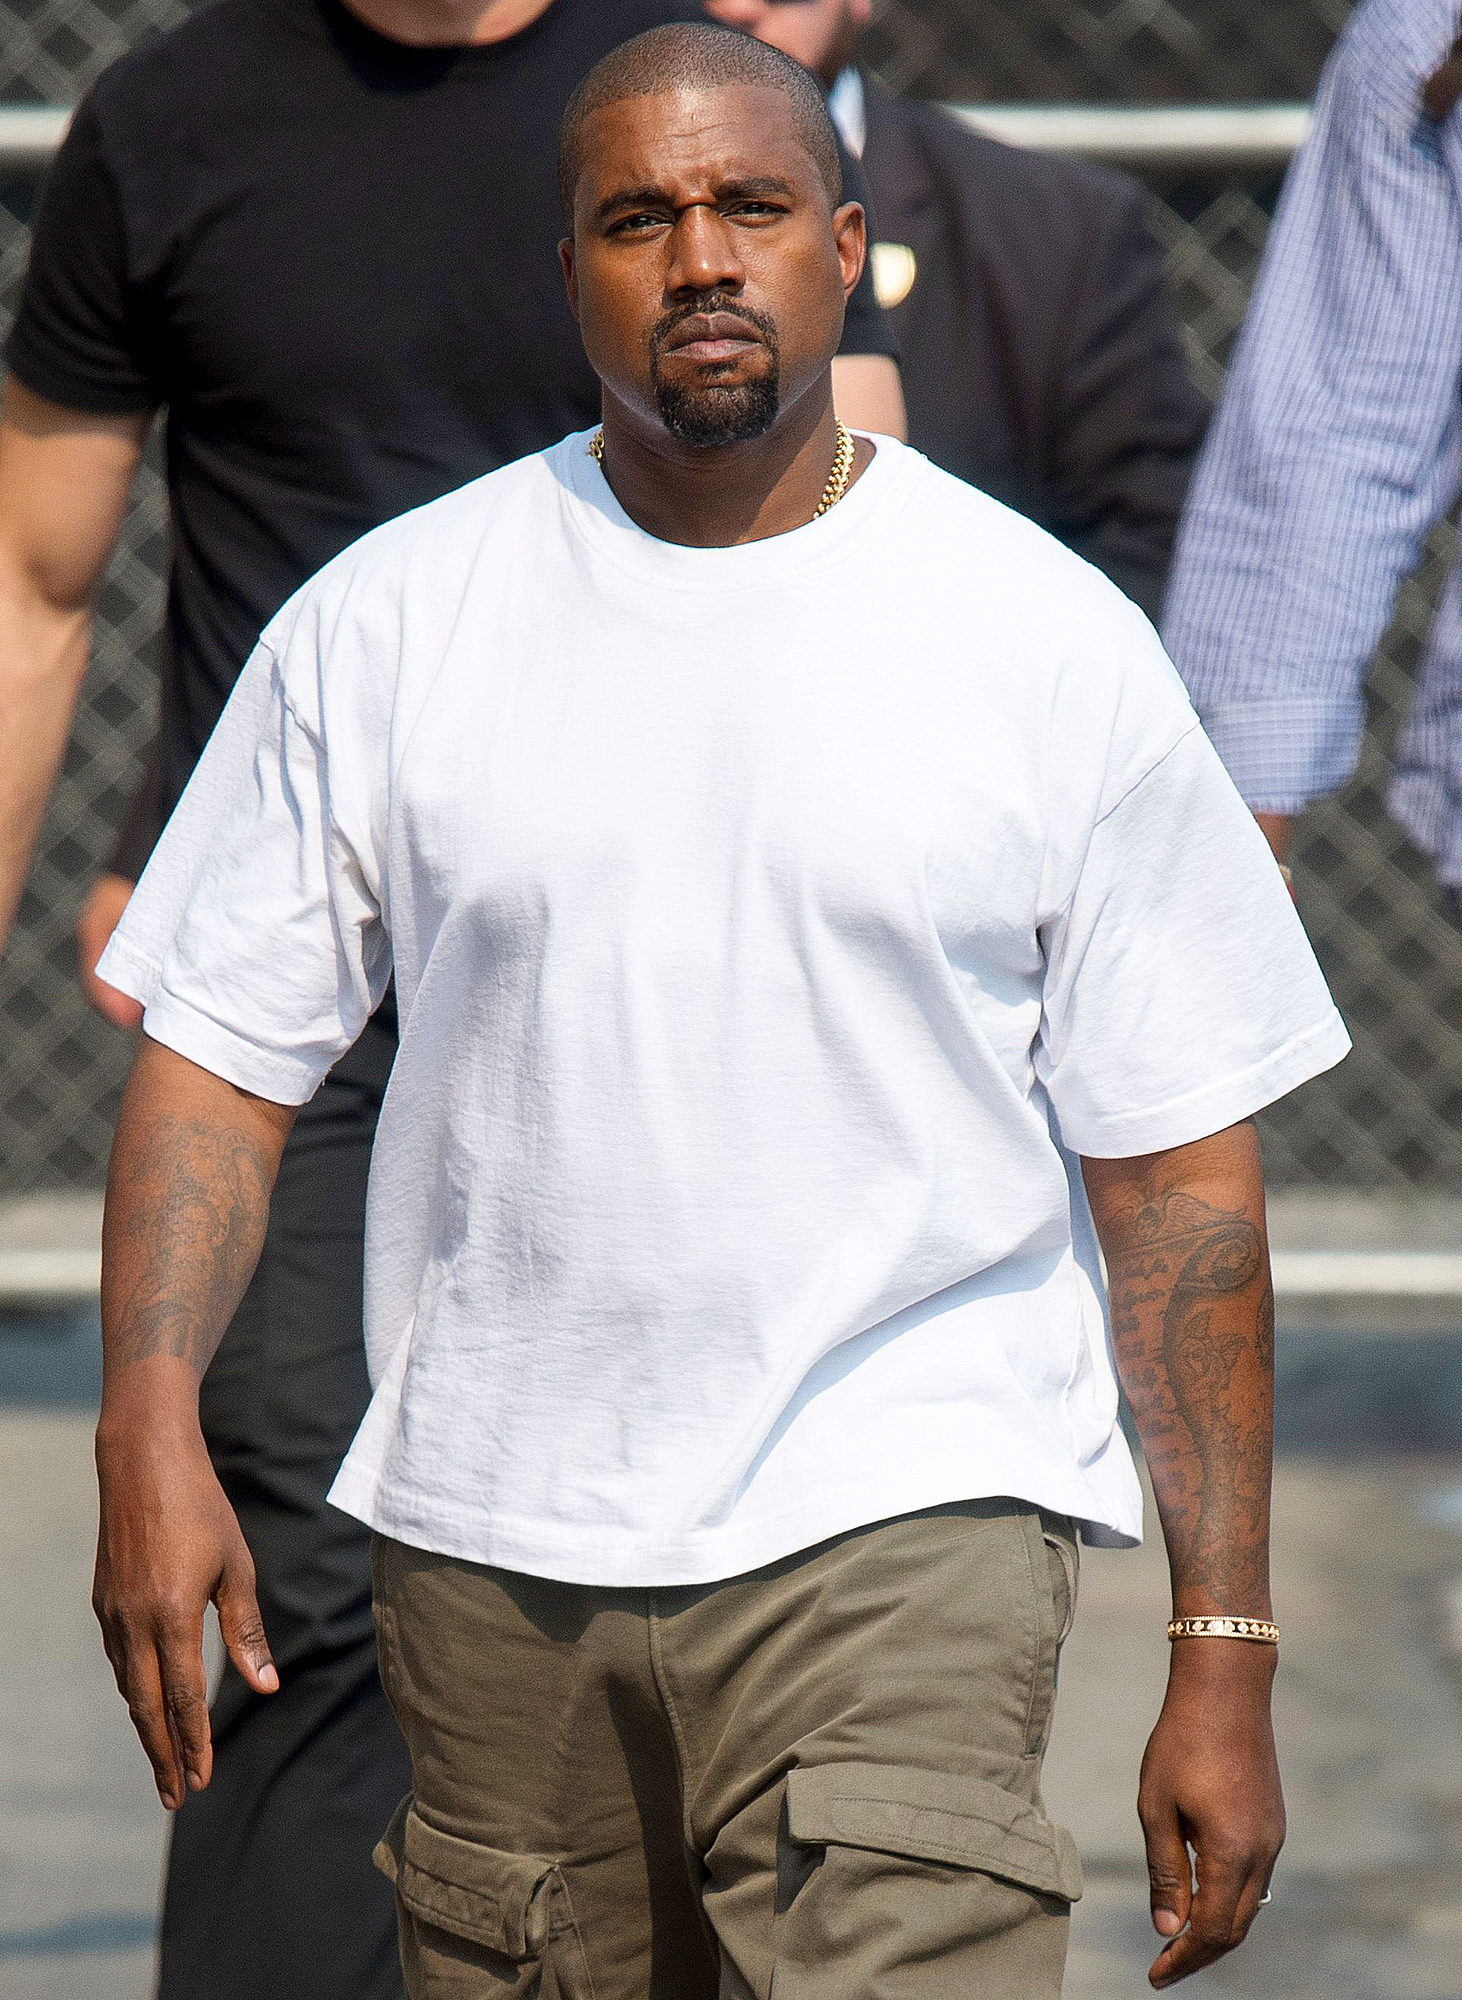 Kanye West Says He Is Not Putting Out Any More Music Until His Contract Ends